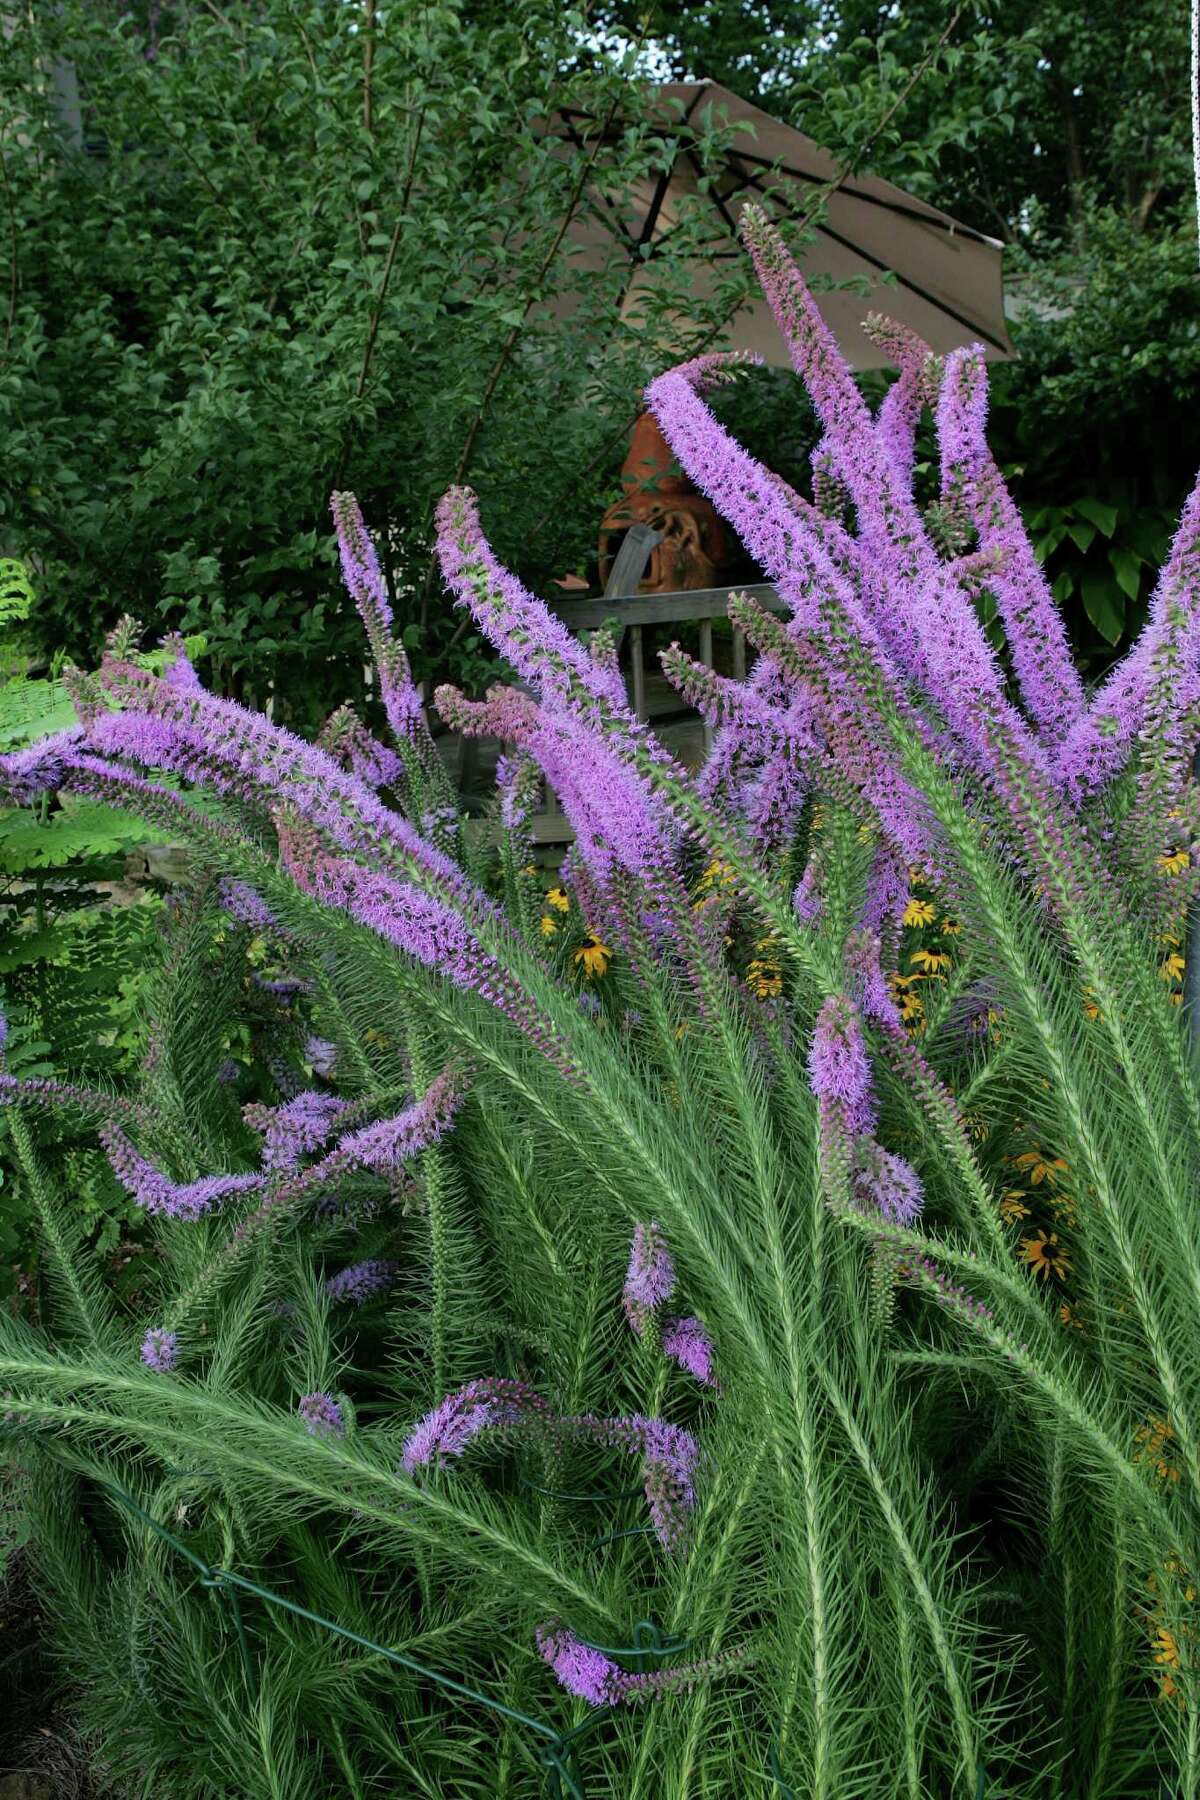 Heidi Sheesley's small front garden and large back garden at her southwest Houston home are designed and planted to attract butterflies and birds. A water pond with an overlooking deck is among the prominent features. Liatris in bloom at the edge of Sheesley's backyard pond. HOUCHRON CAPTION (08/06/2005) SECSTAR COLORFRONT: NATIVE LIATRIS.